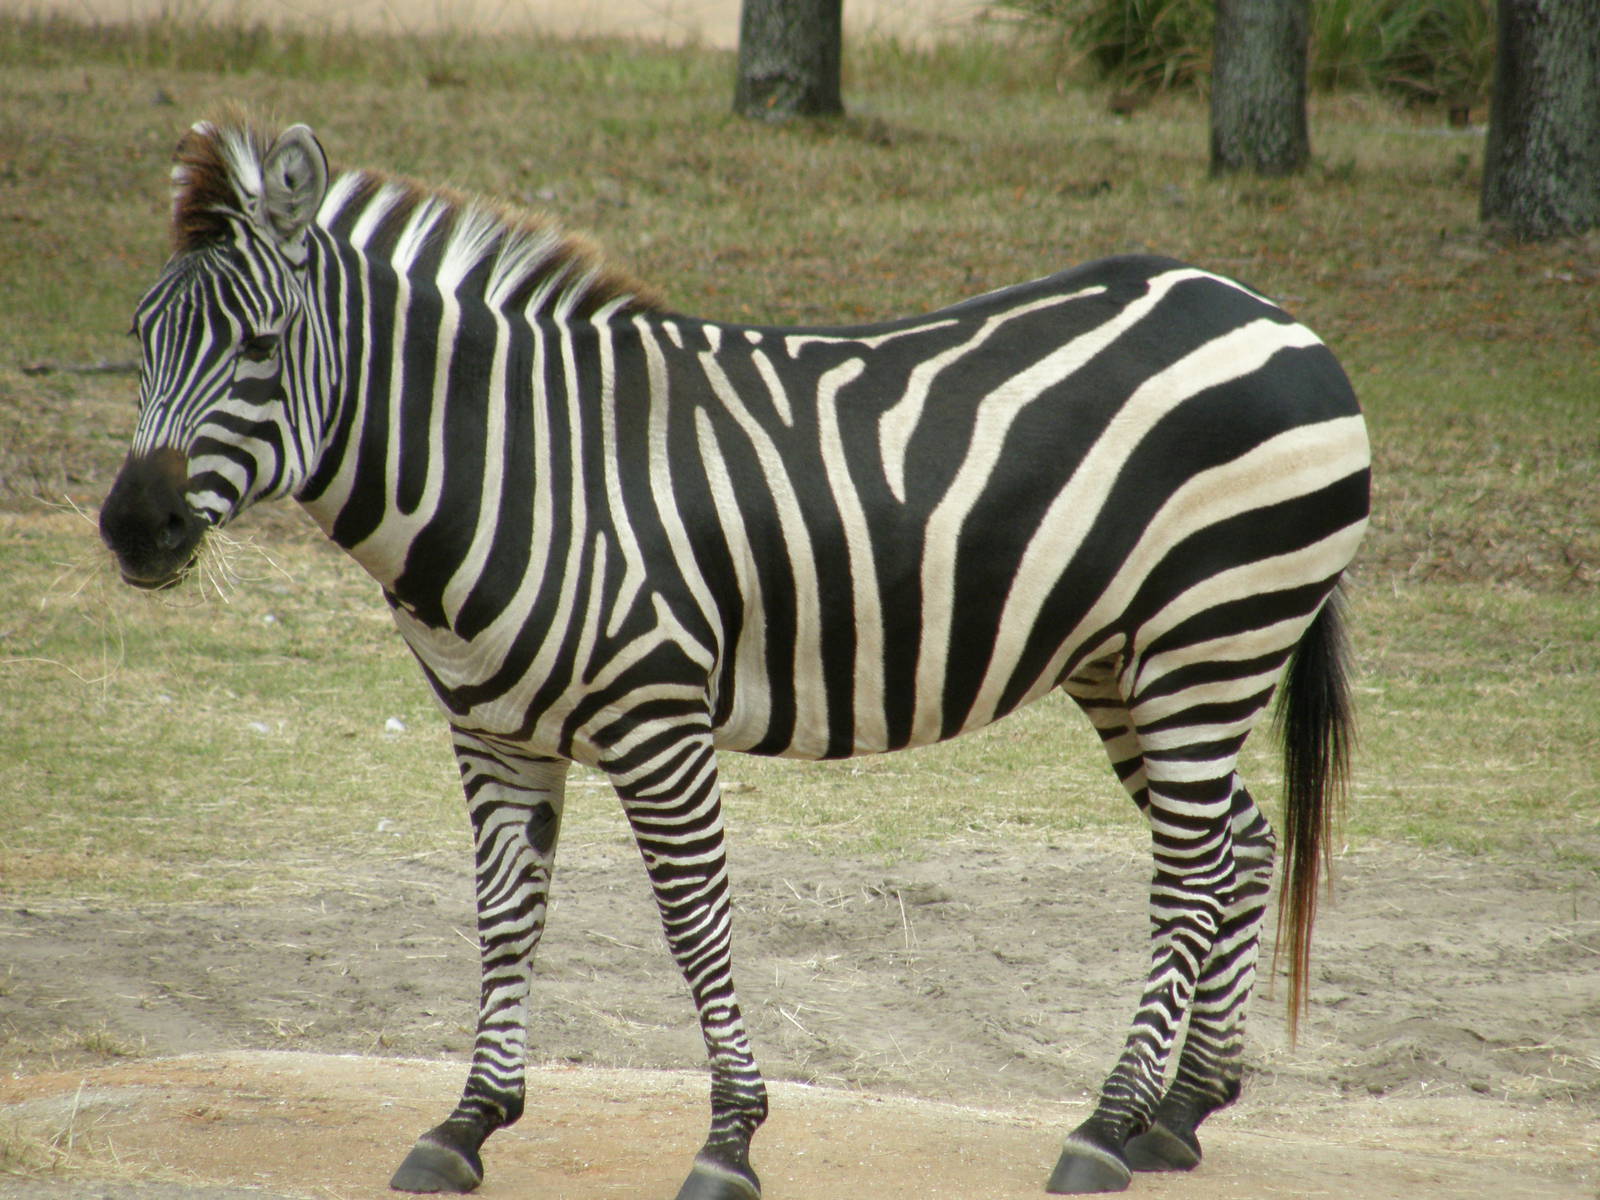 ... zebra and the Upper Zambezi species are the same, but eventually, scientists discovered that there are only minor differences between those species, ...